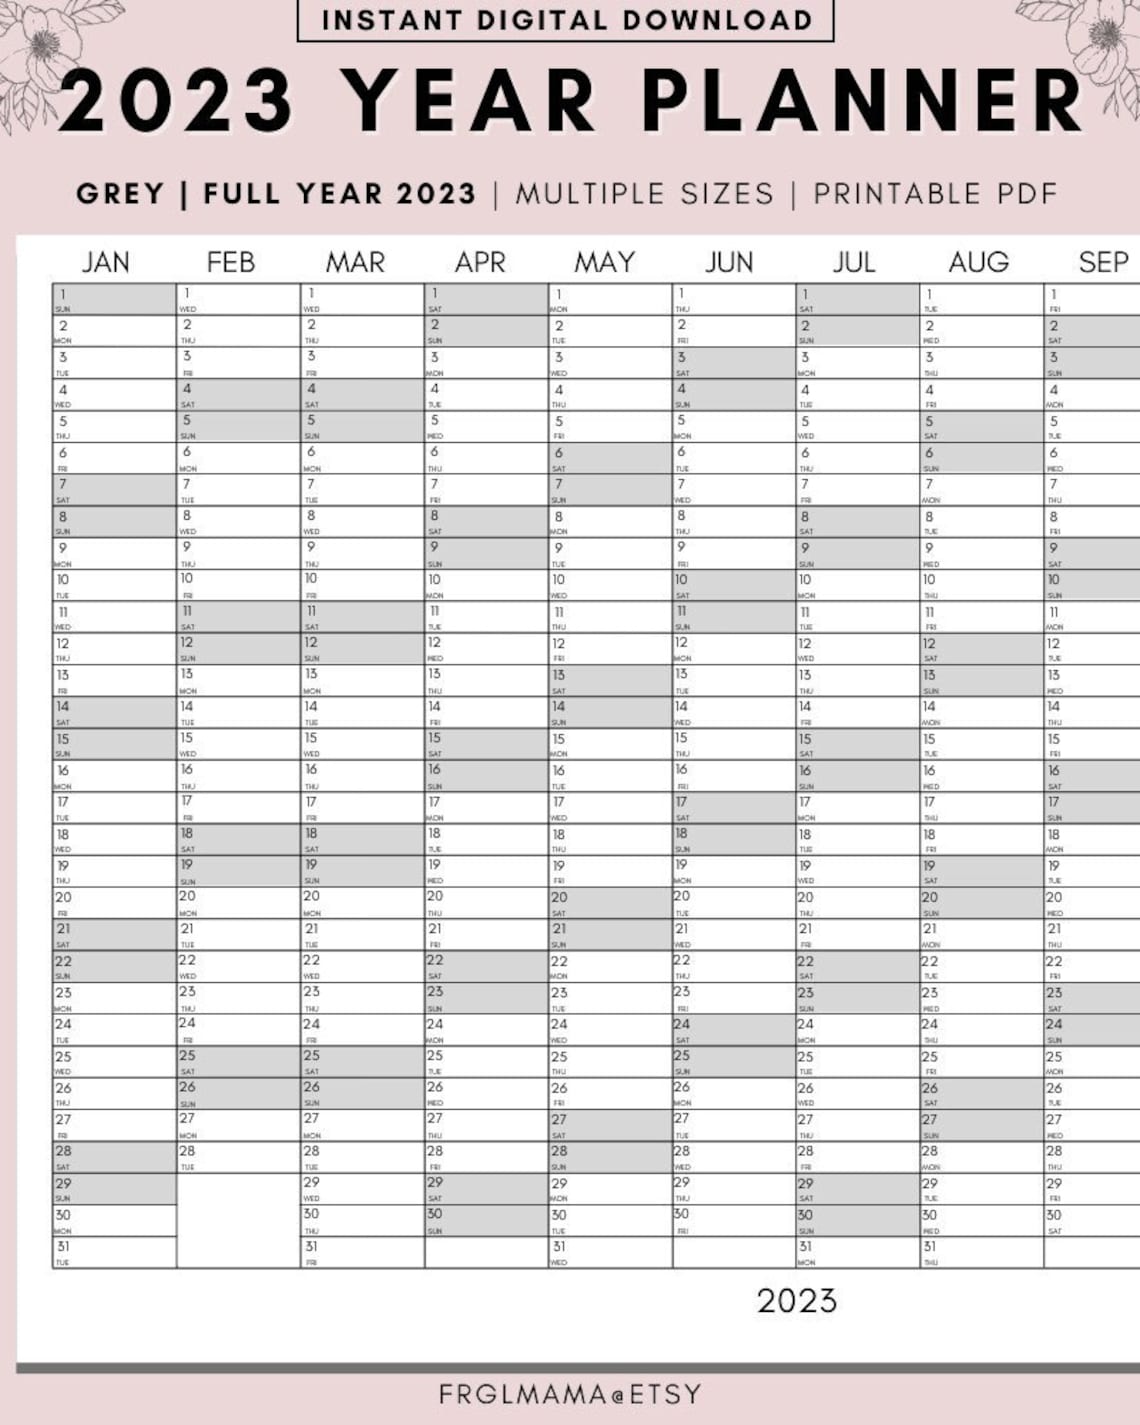 2023-year-planner-yearly-planner-on-1-page-landscape-etsy